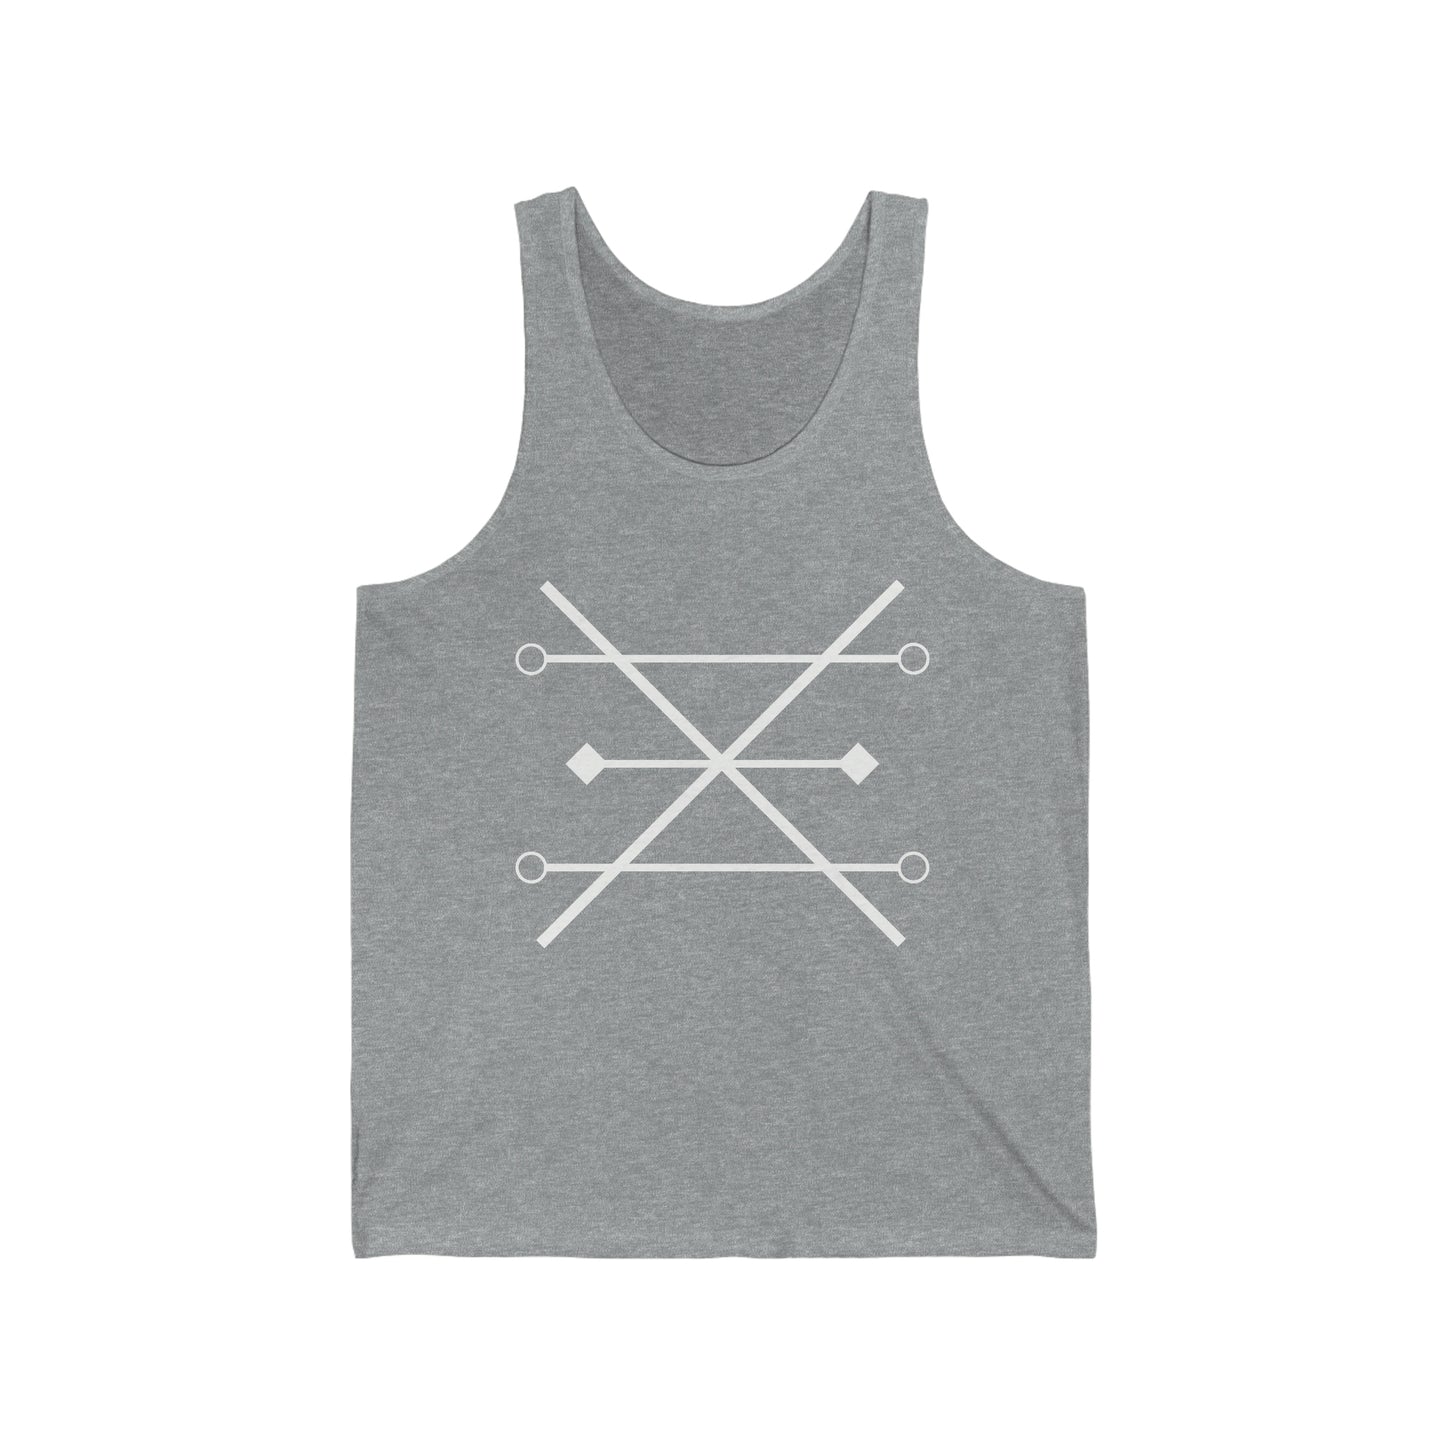 Younger Bodies Men's Jersey Tank